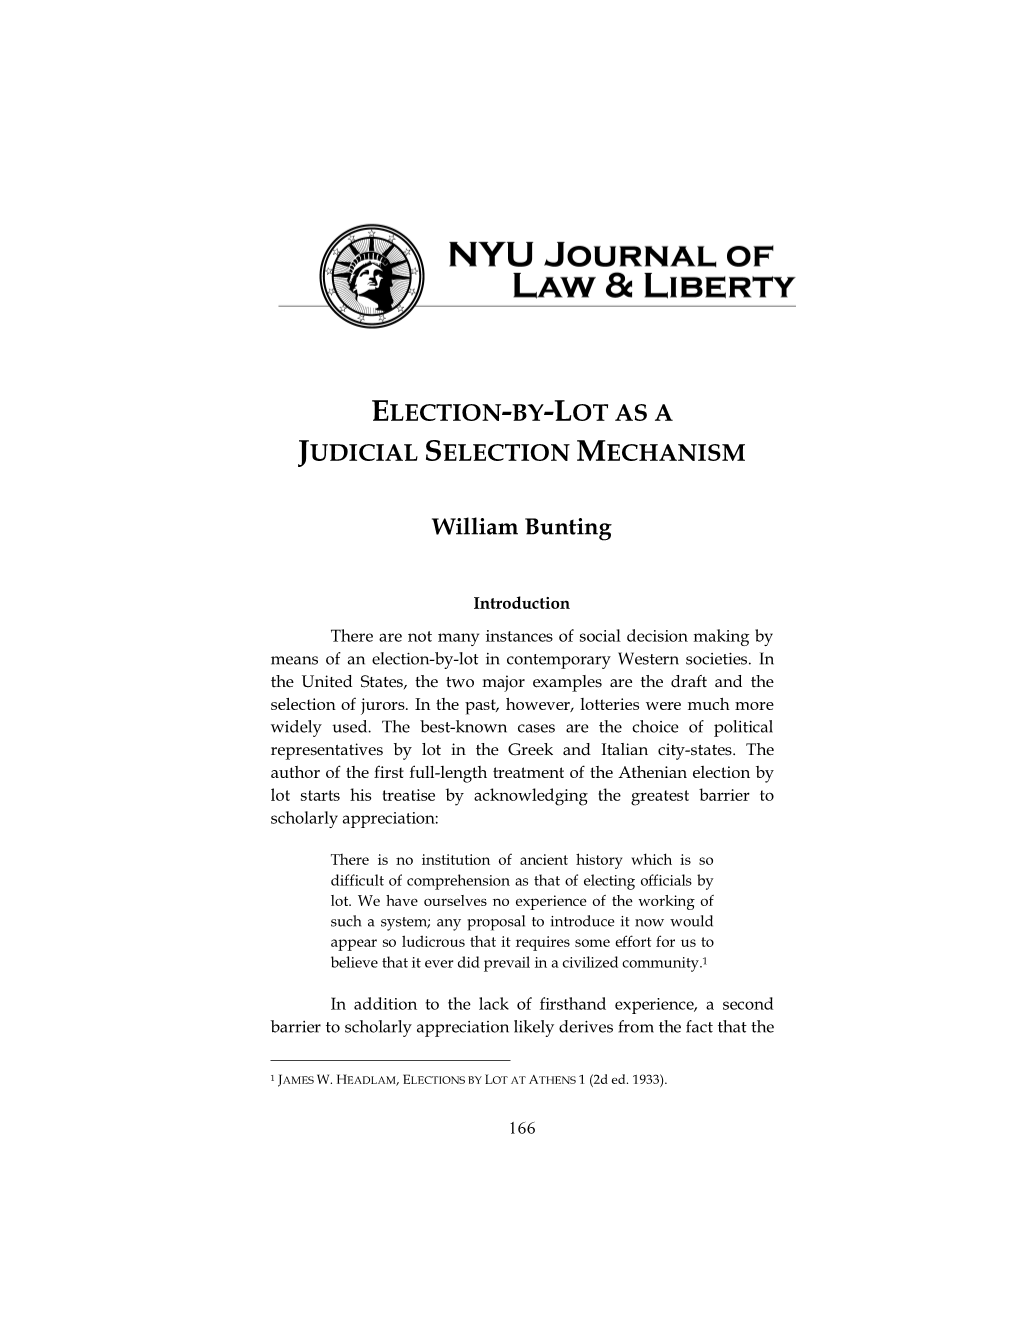 Election-By-Lot As a Judicial Selection Mechanism